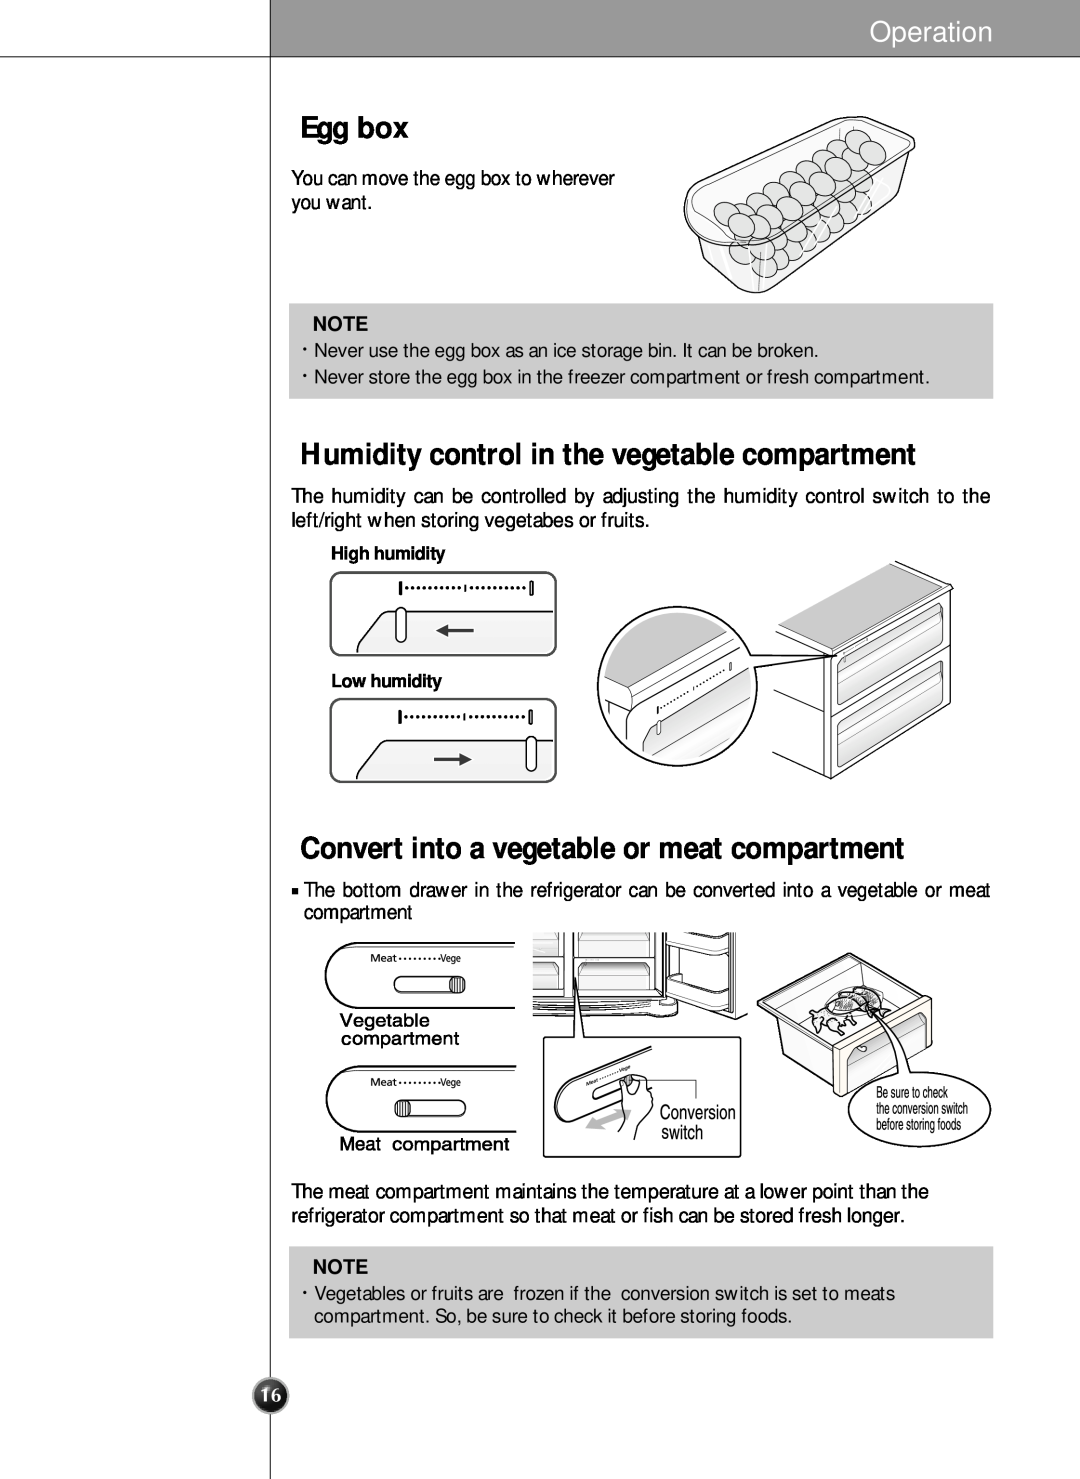 LG Electronics SXS Egg box, Humidity control in the vegetable compartment, Convert into a vegetable or meat compartment 